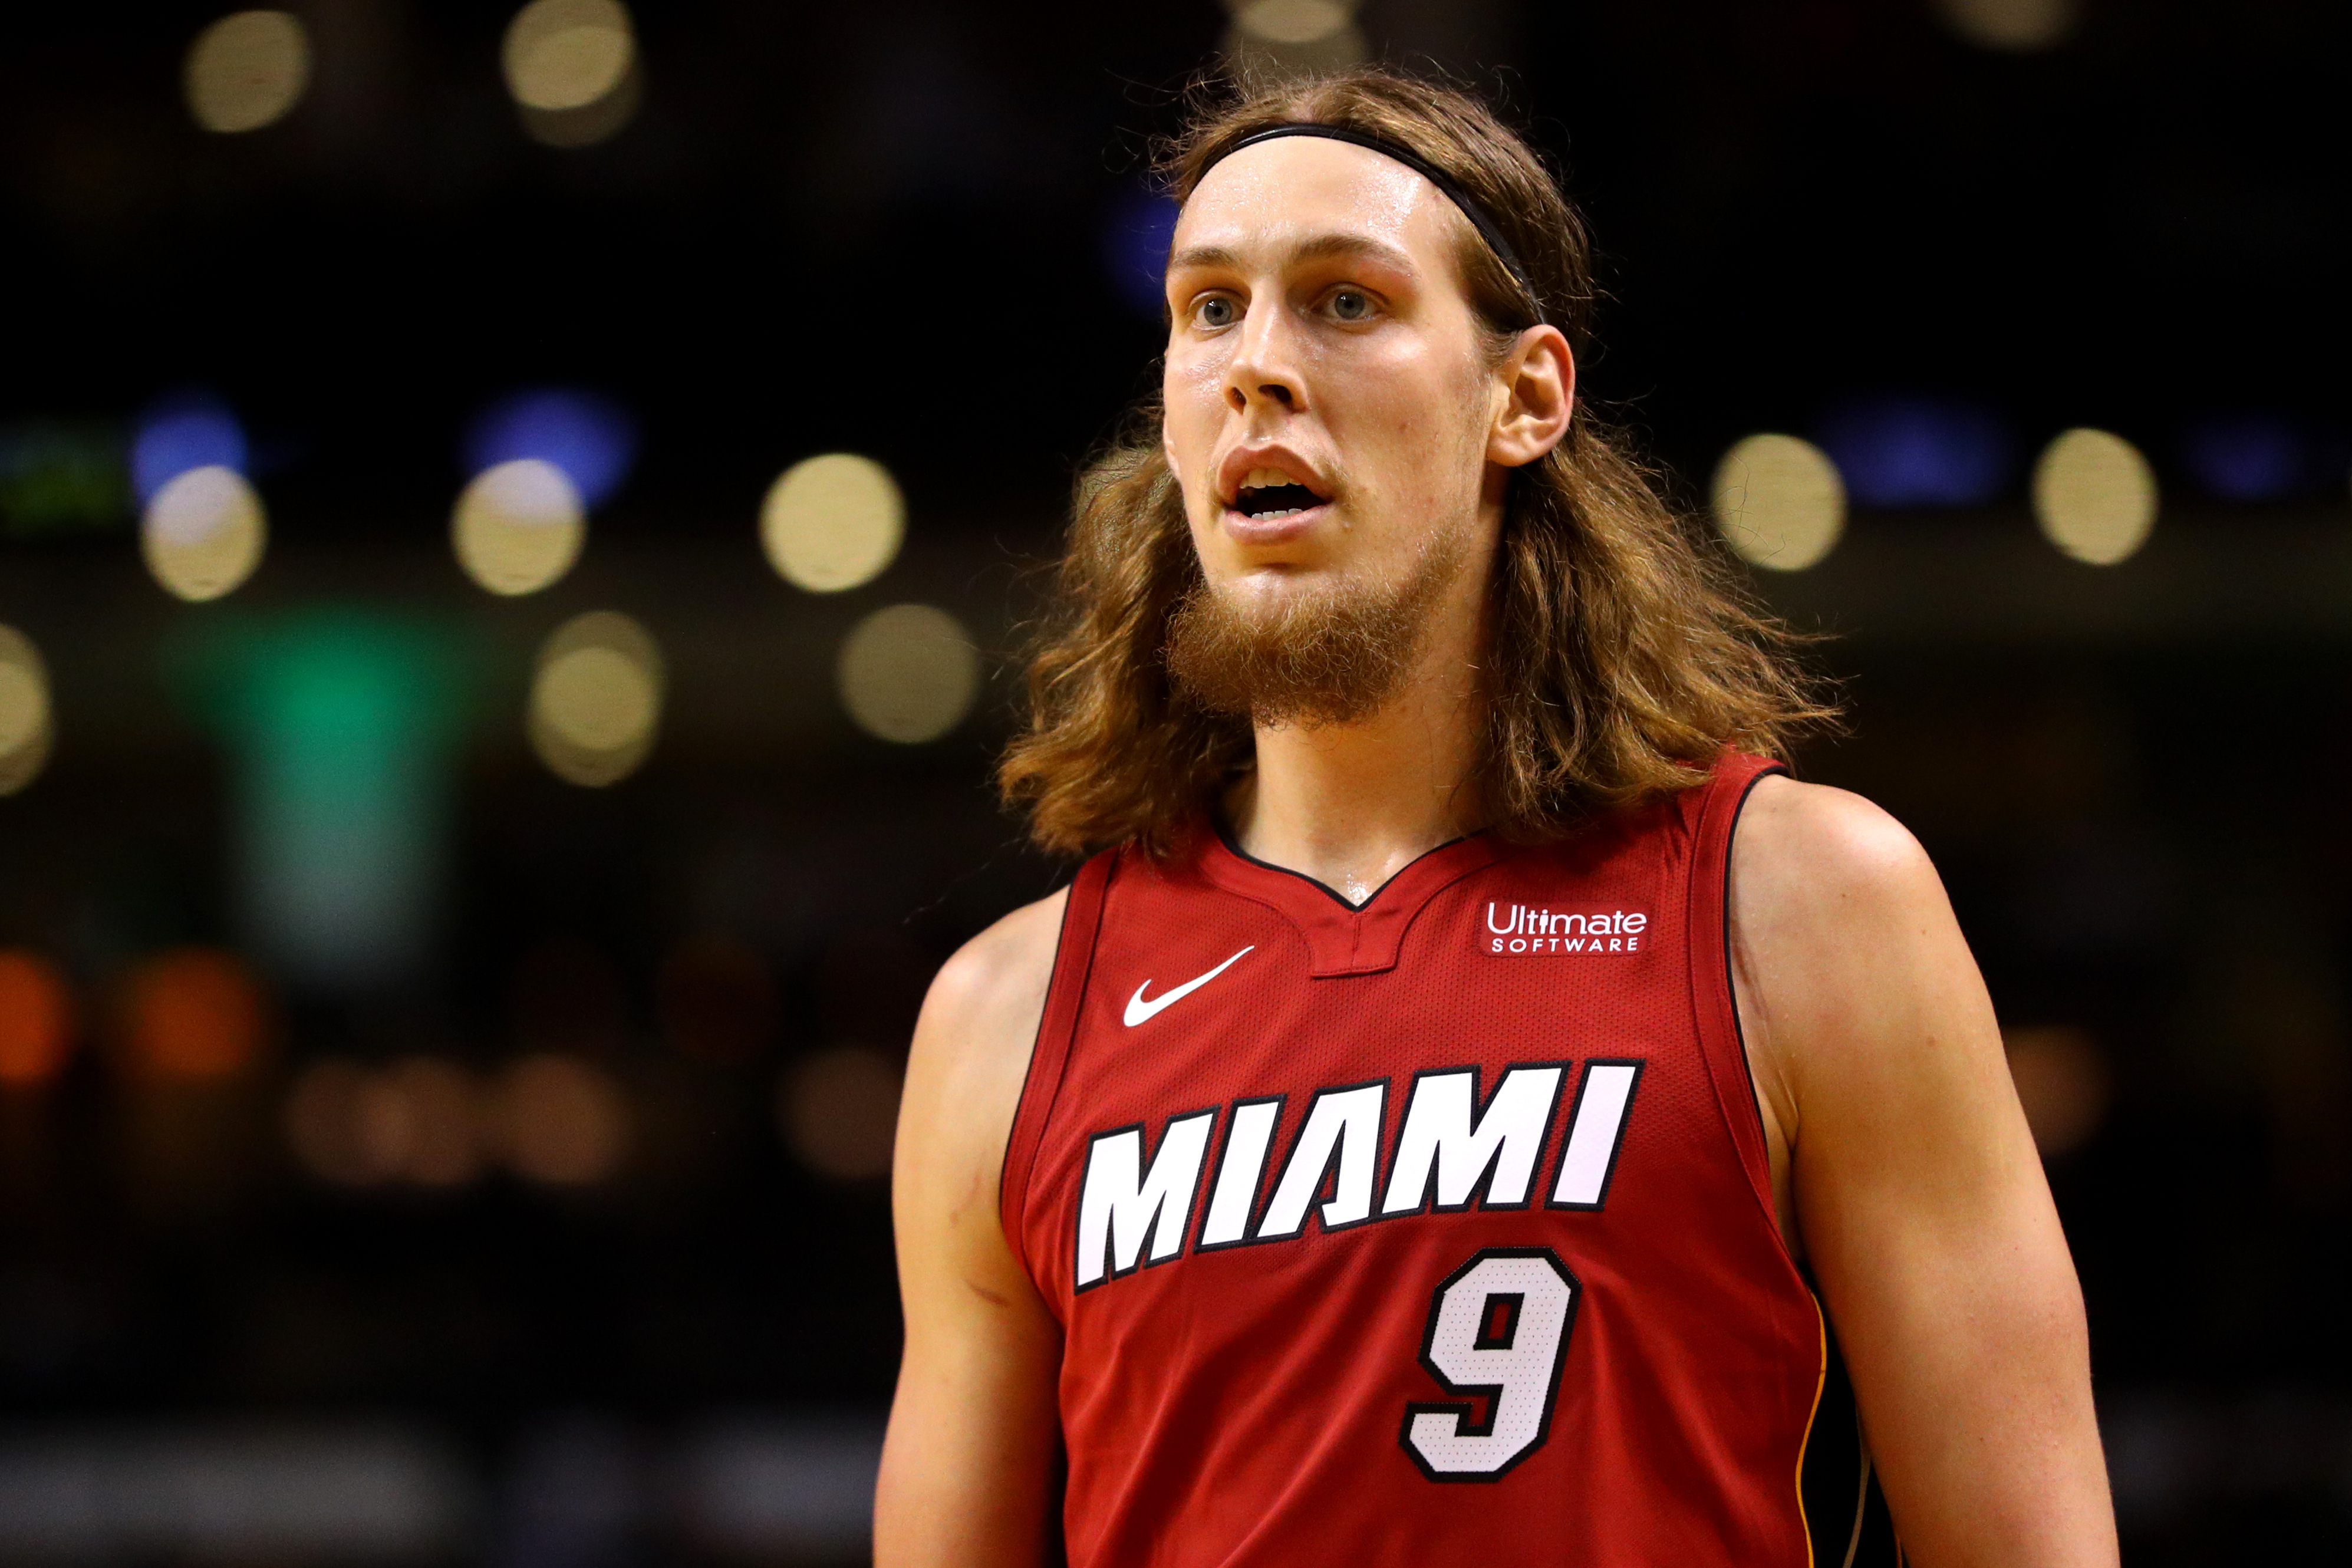 Miami Heat: Your praise for Kelly Olynyk isn't as loud as your